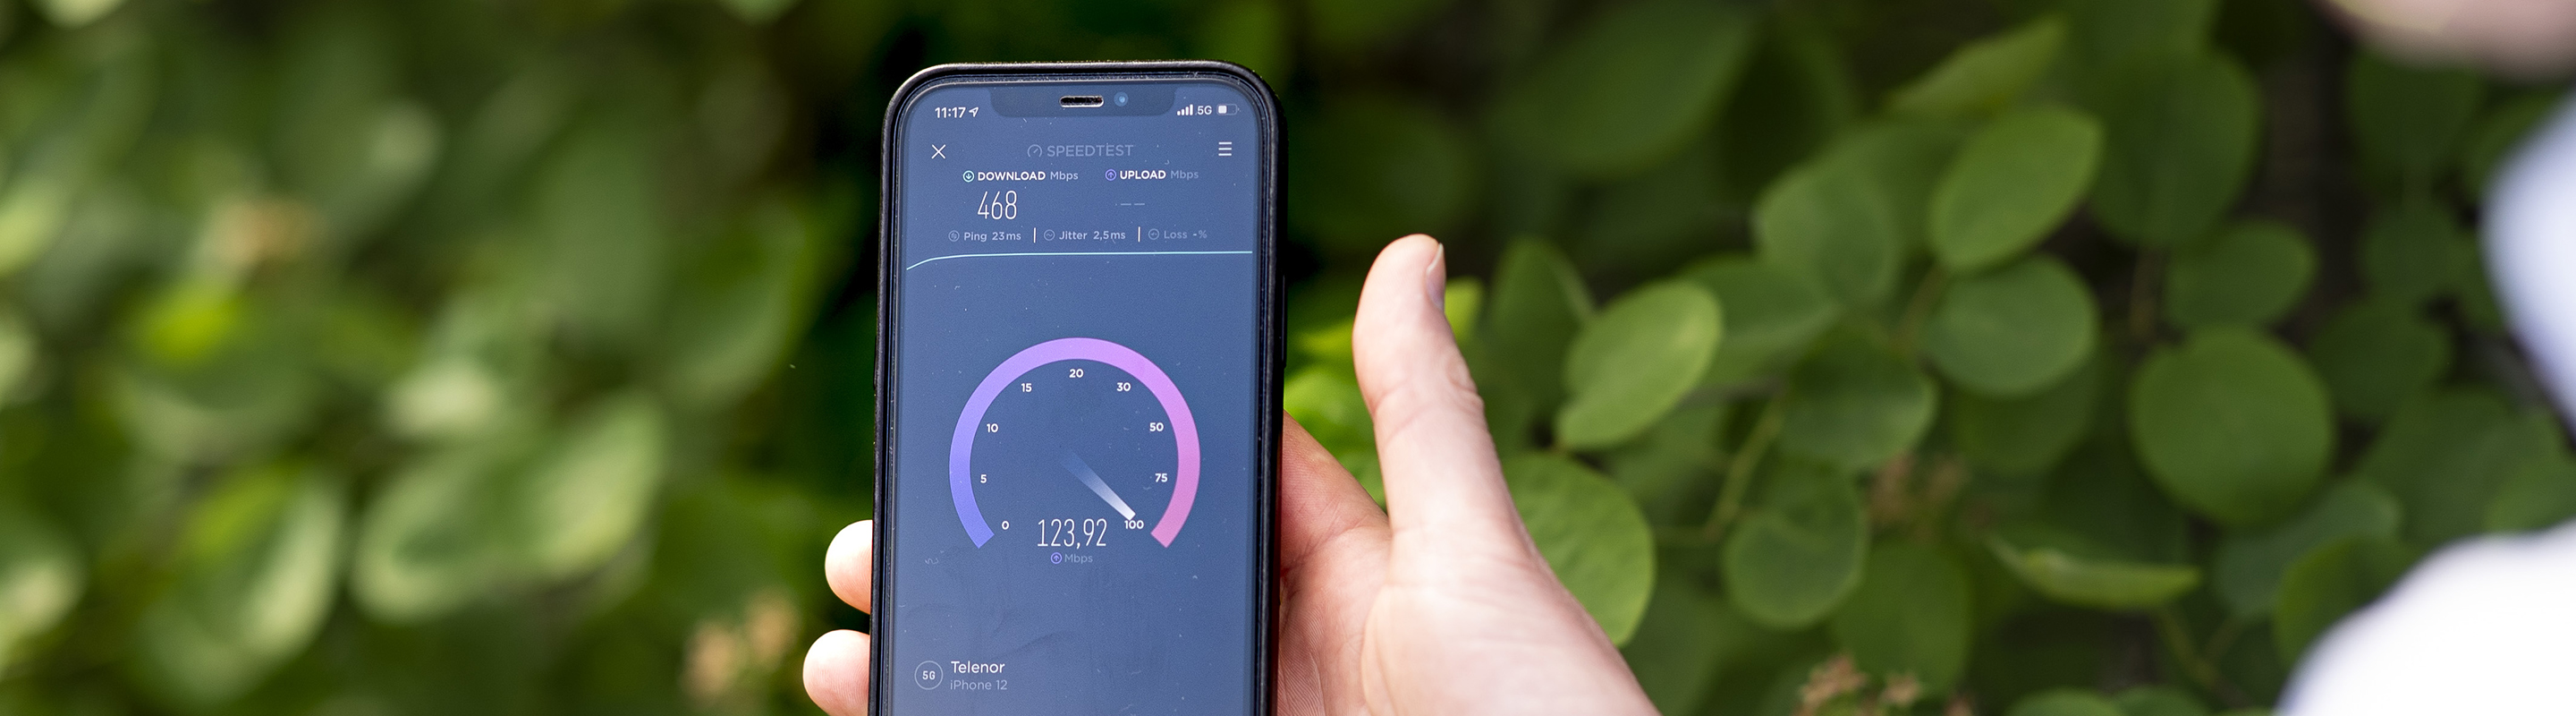 Mobile phone showing 5G speed test from Ookla